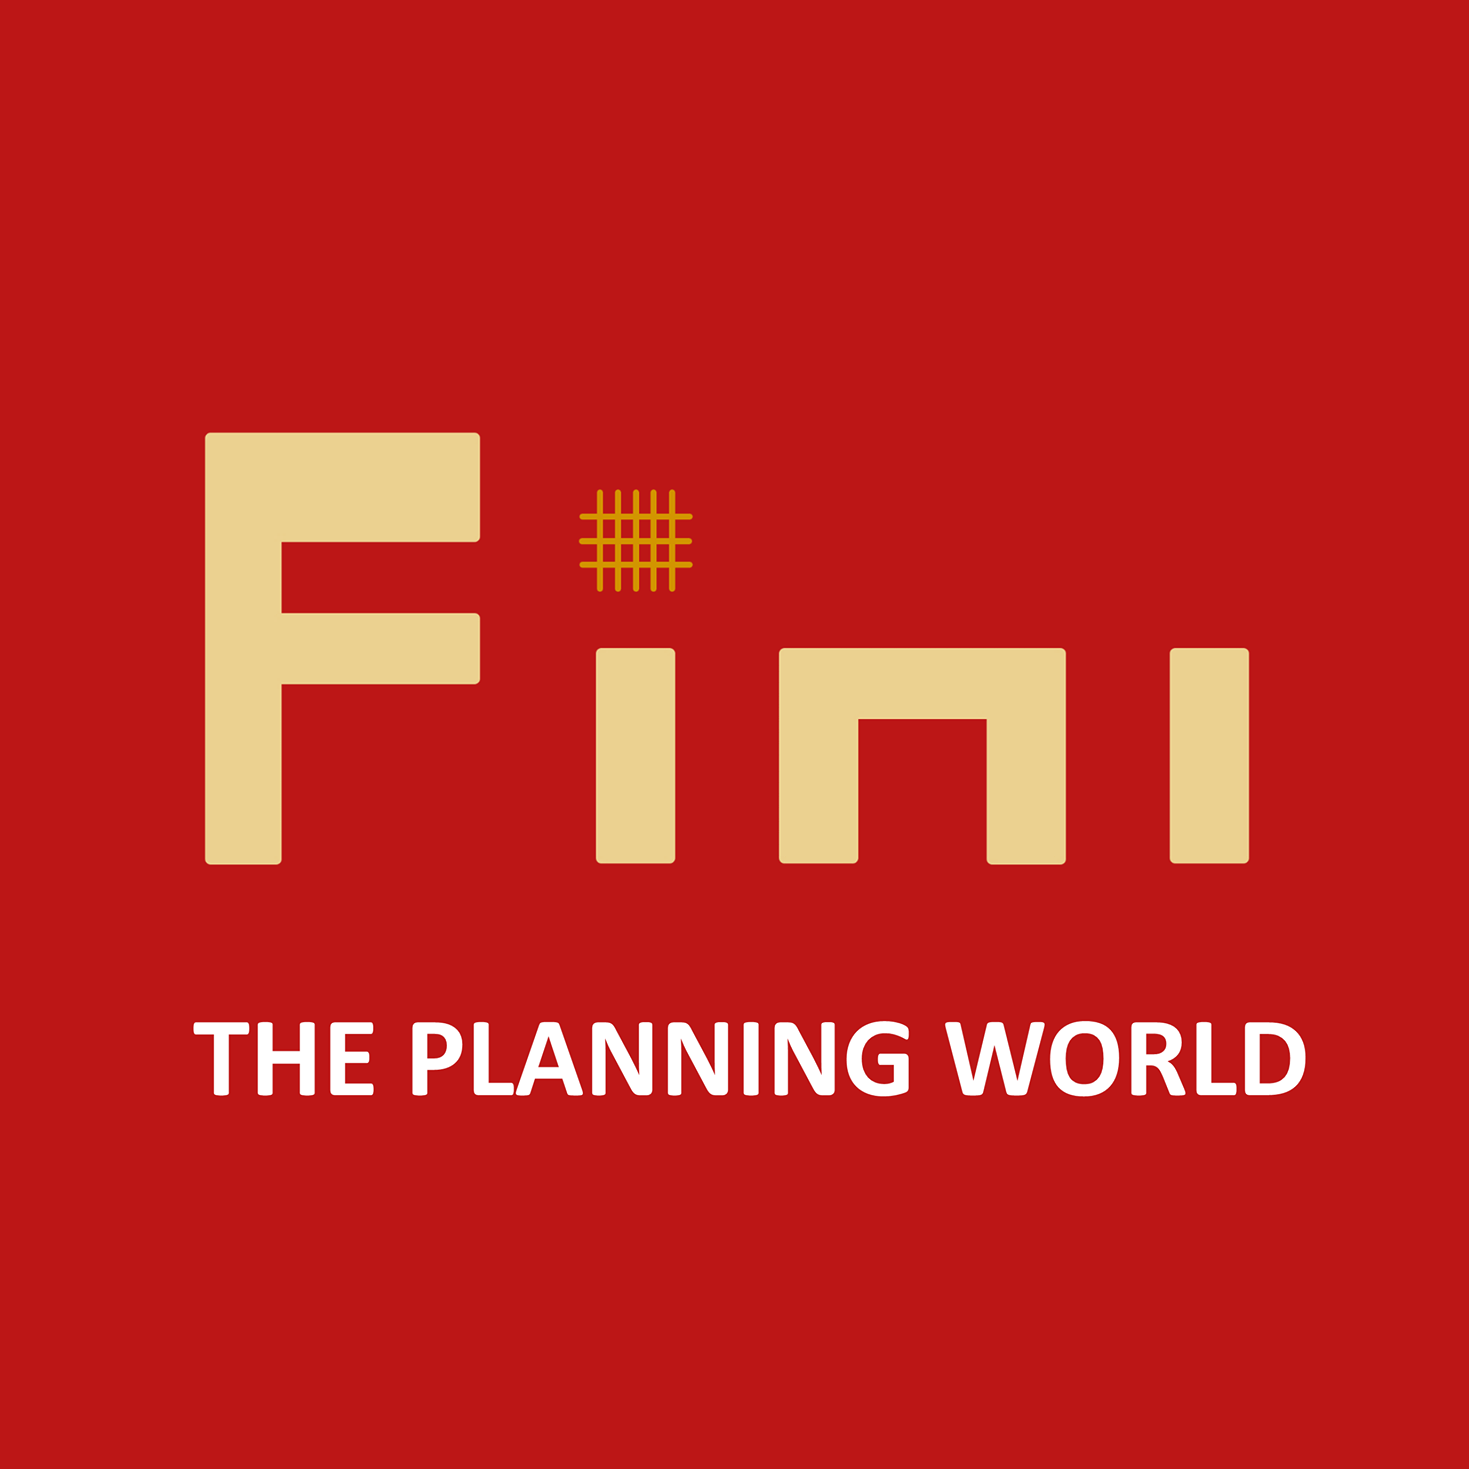 Fini the planning world|Accounting Services|Professional Services